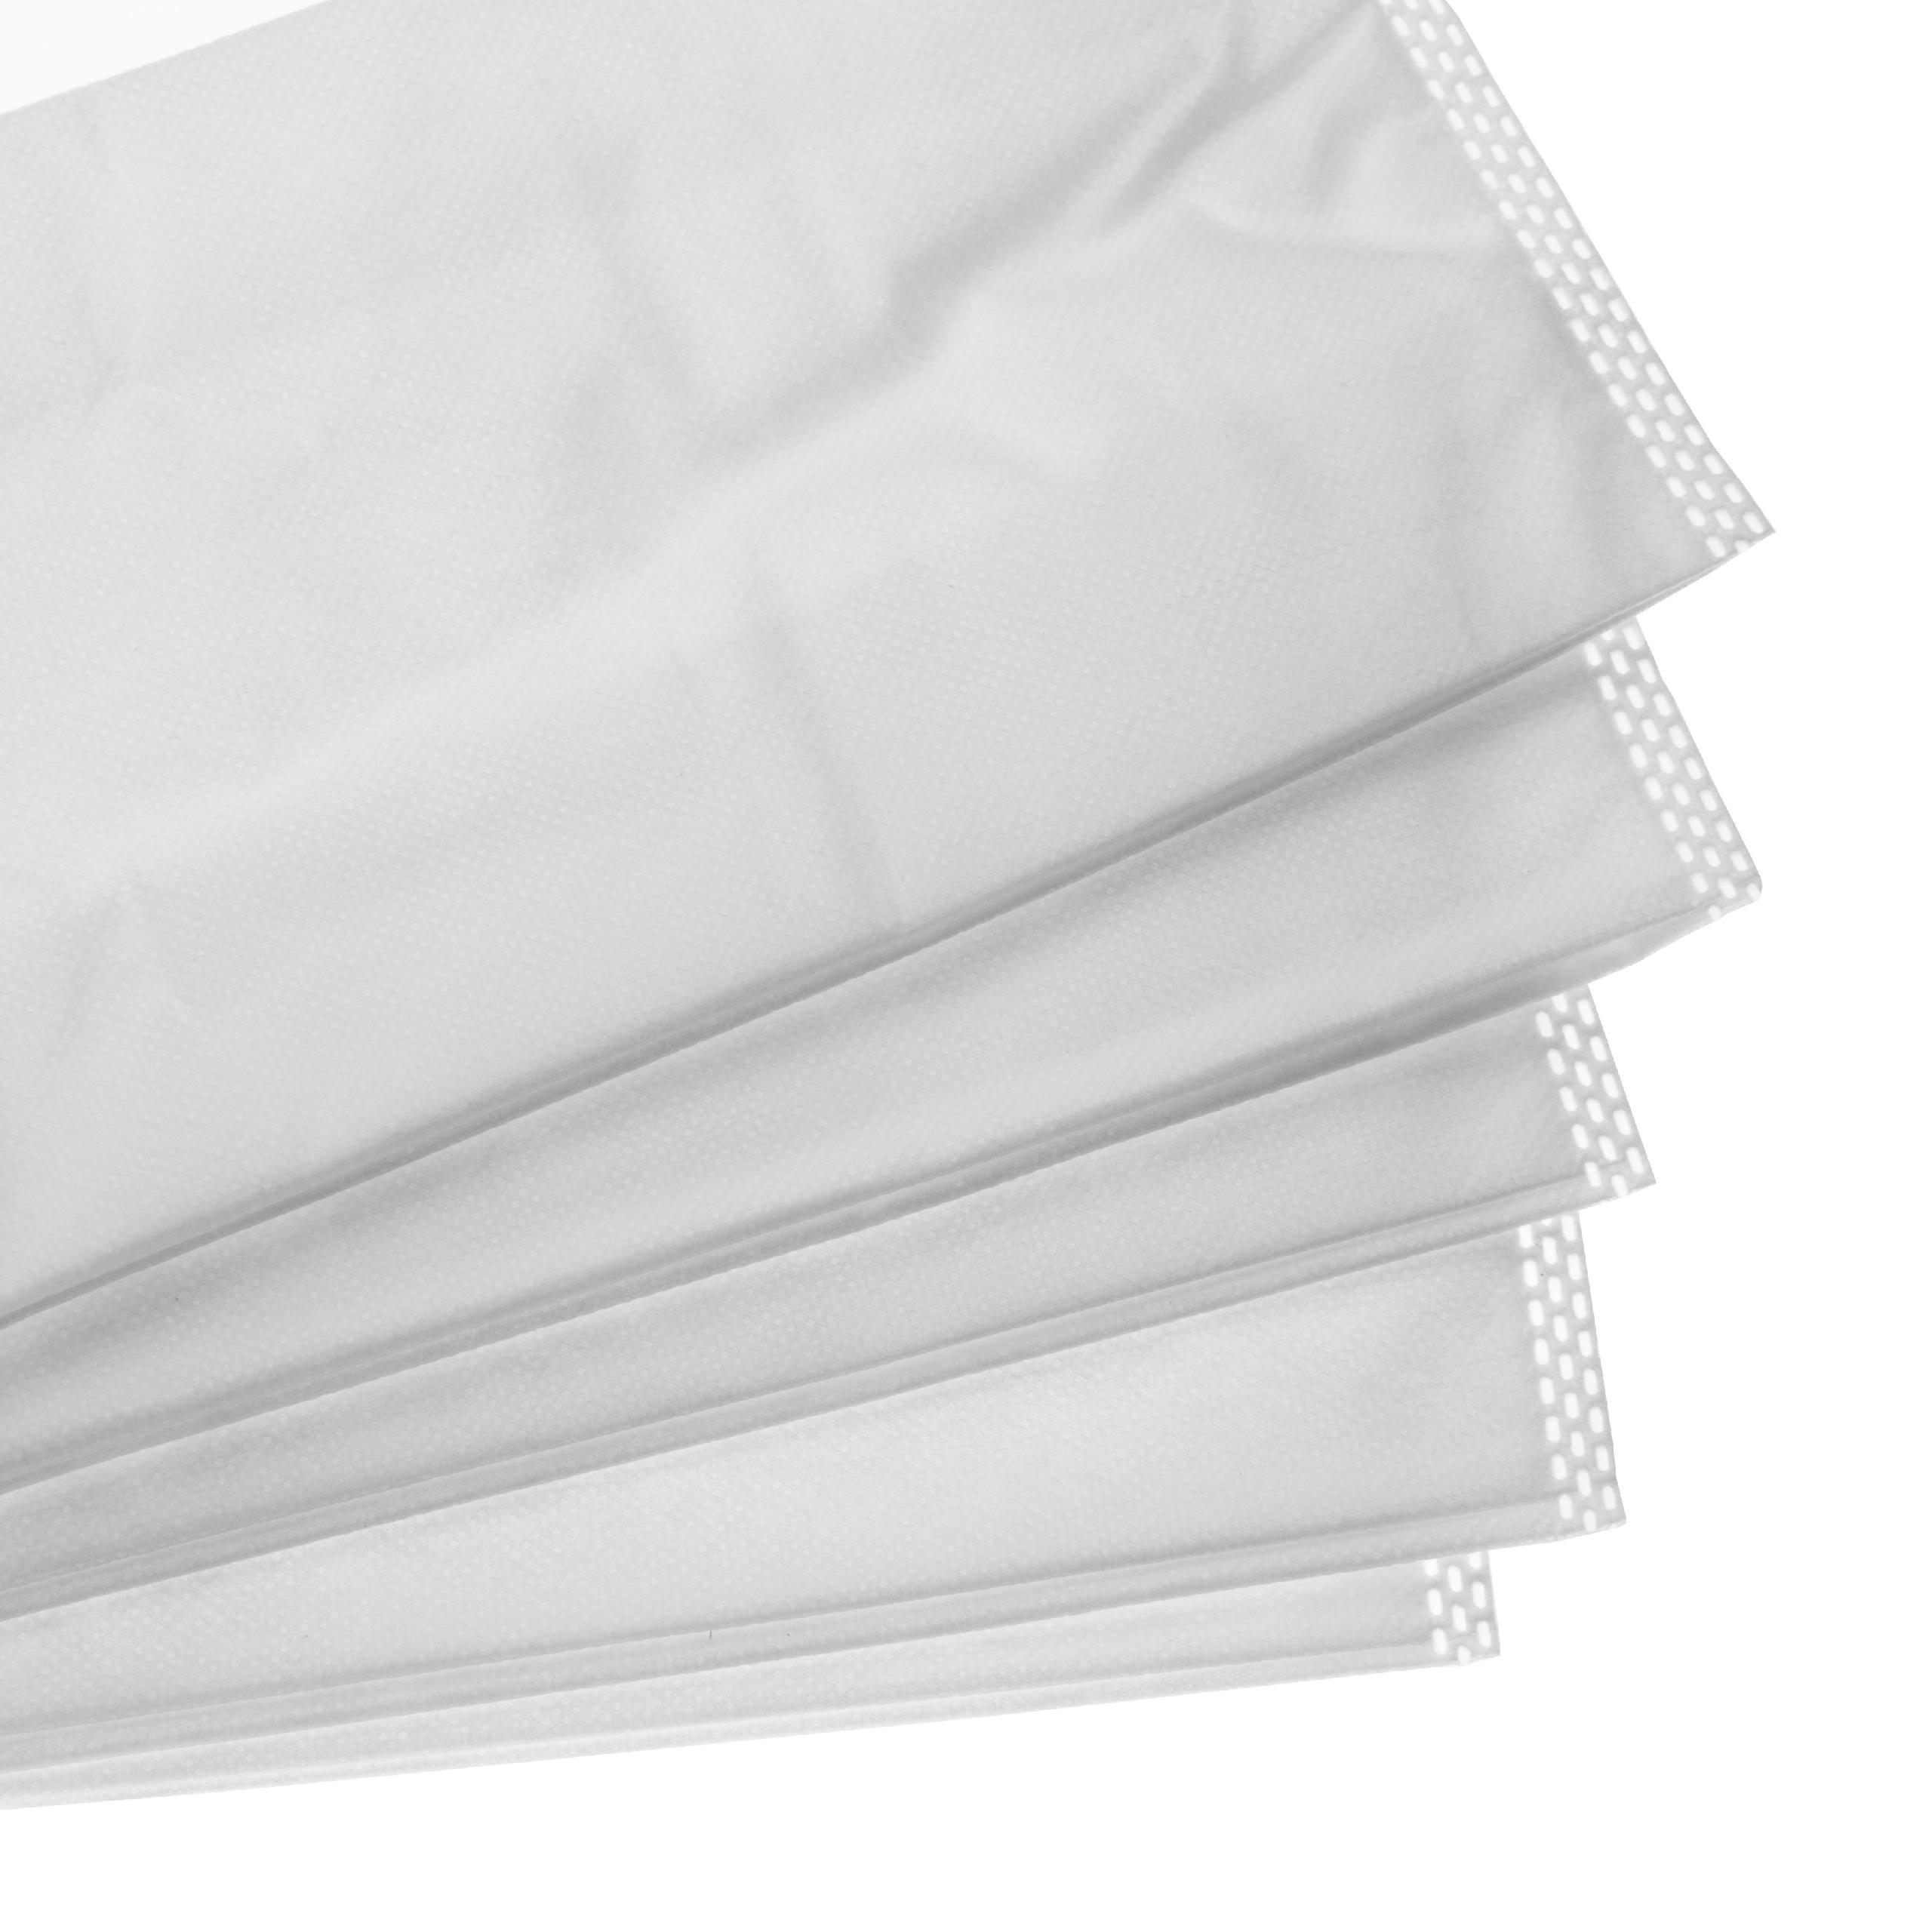 5x Vacuum Cleaner Bag replaces Nilfisk 1471058500, 107413586 for Clarke - microfleece